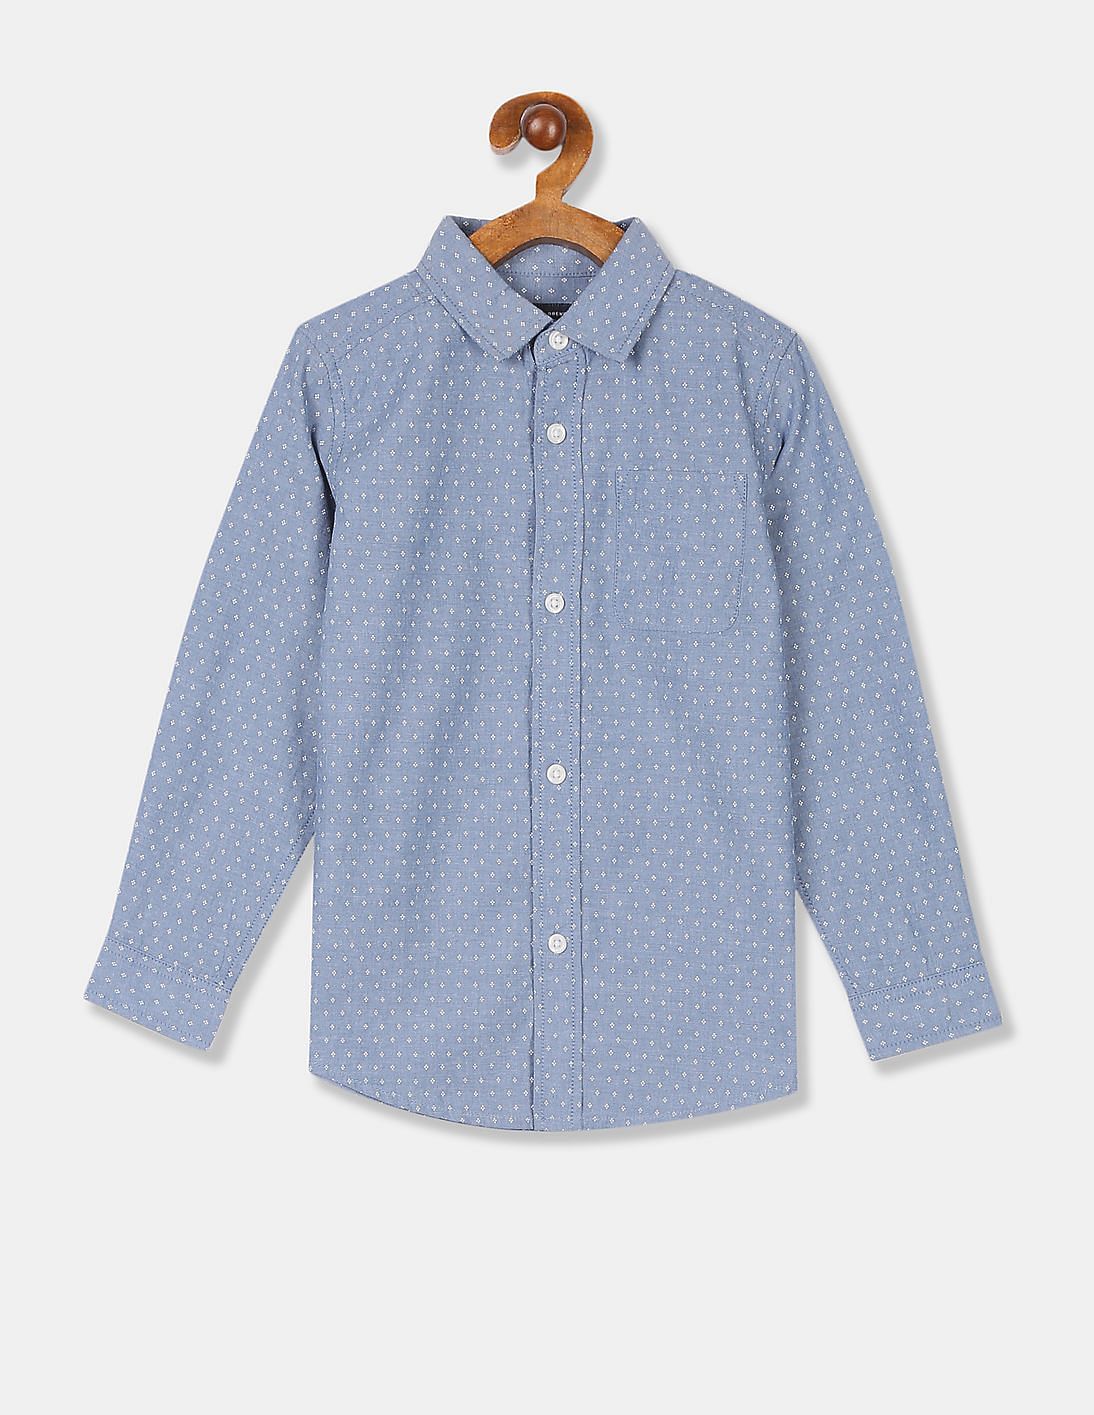 Buy The Children's Place Boys Blue Printed Chambray Shirt - NNNOW.com